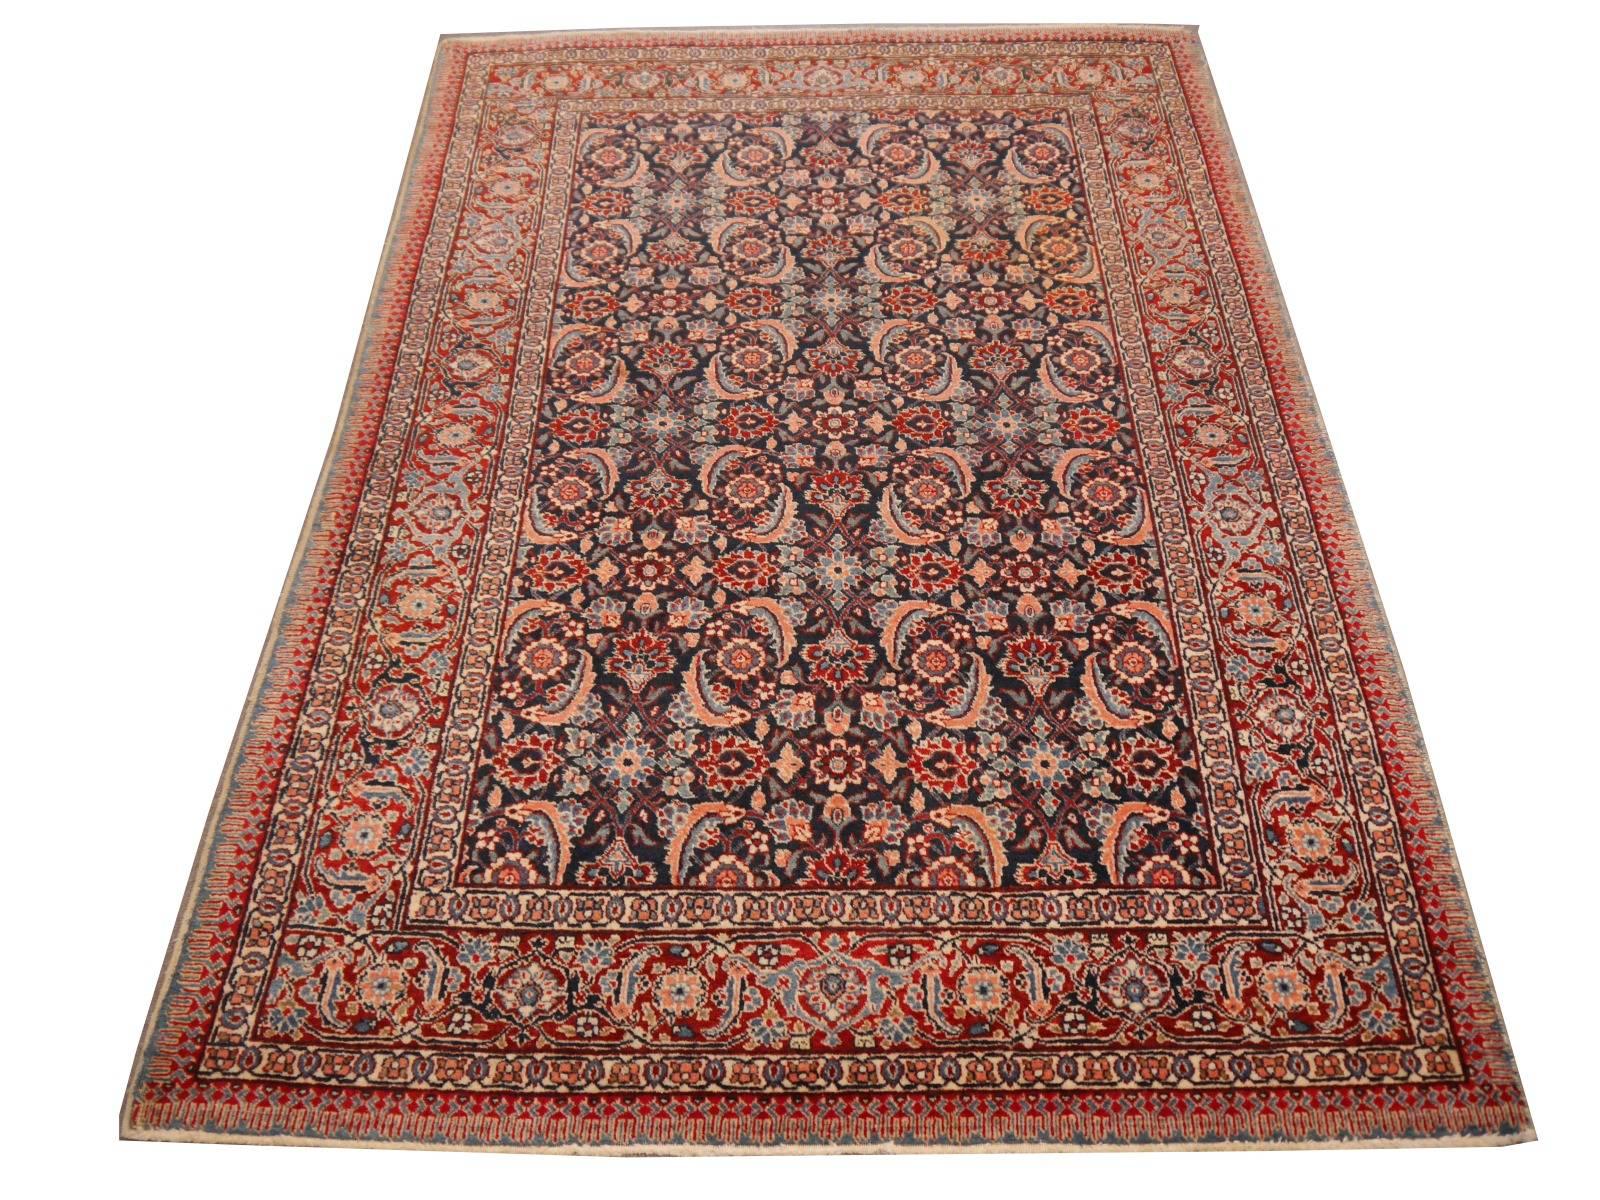 A beautiful antique rug from Azerbeijan. It was hand knotted using highland wool from the Azerbaijan District which is located between the Caspian sea, the Caucasus Mountains and the Turkish Border. The background color is a decent Jeans - Blue,